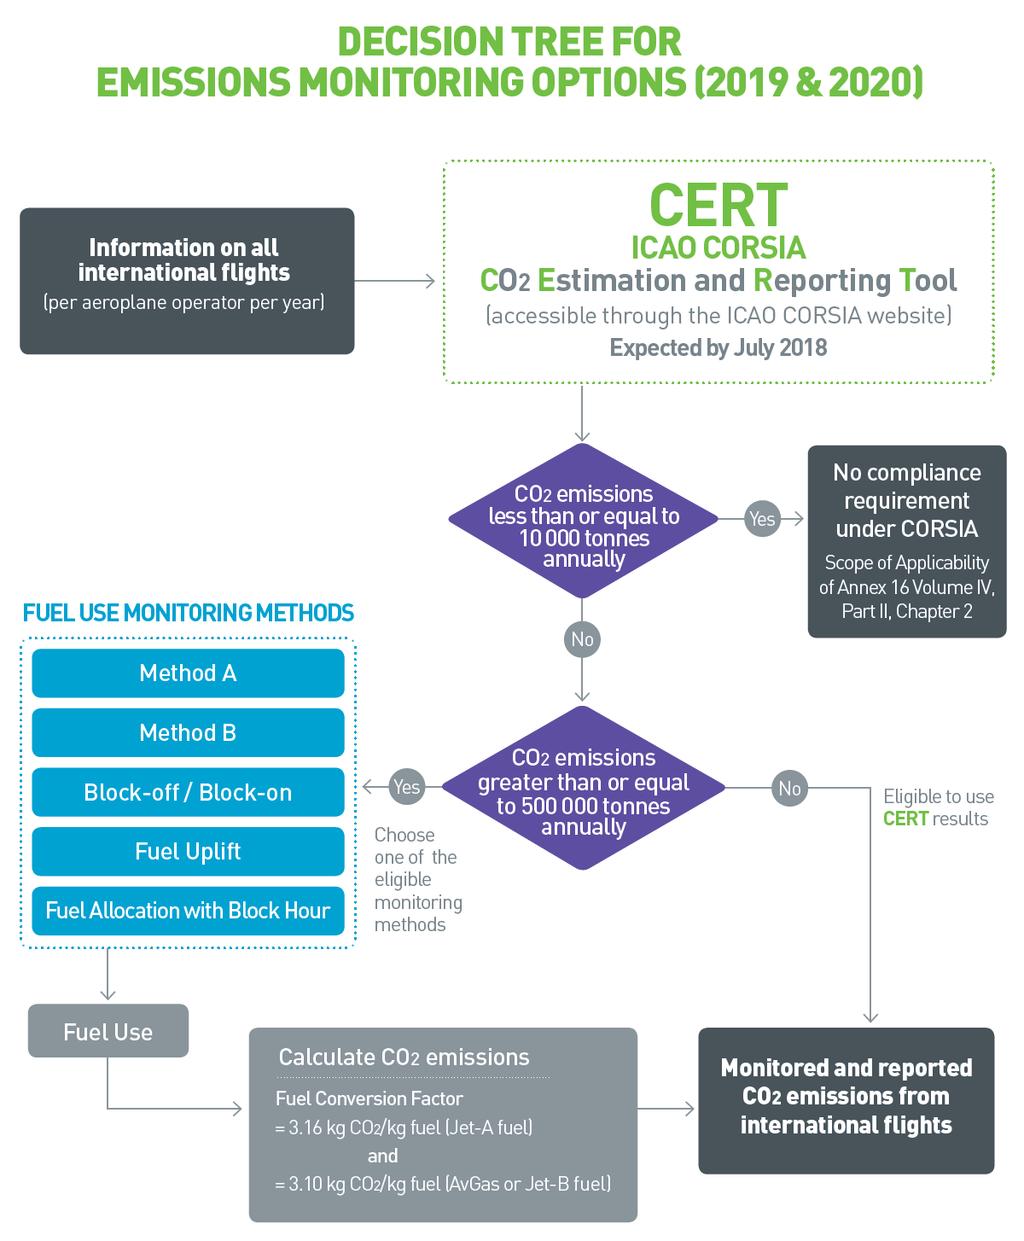 Decision Tree for Emissions Monitoring Options (2019&2020) Decision tree to help aeroplane operator to determine whether they are eligible to use; (1) the ICAO CORSIA CO2 Estimation and Reporting